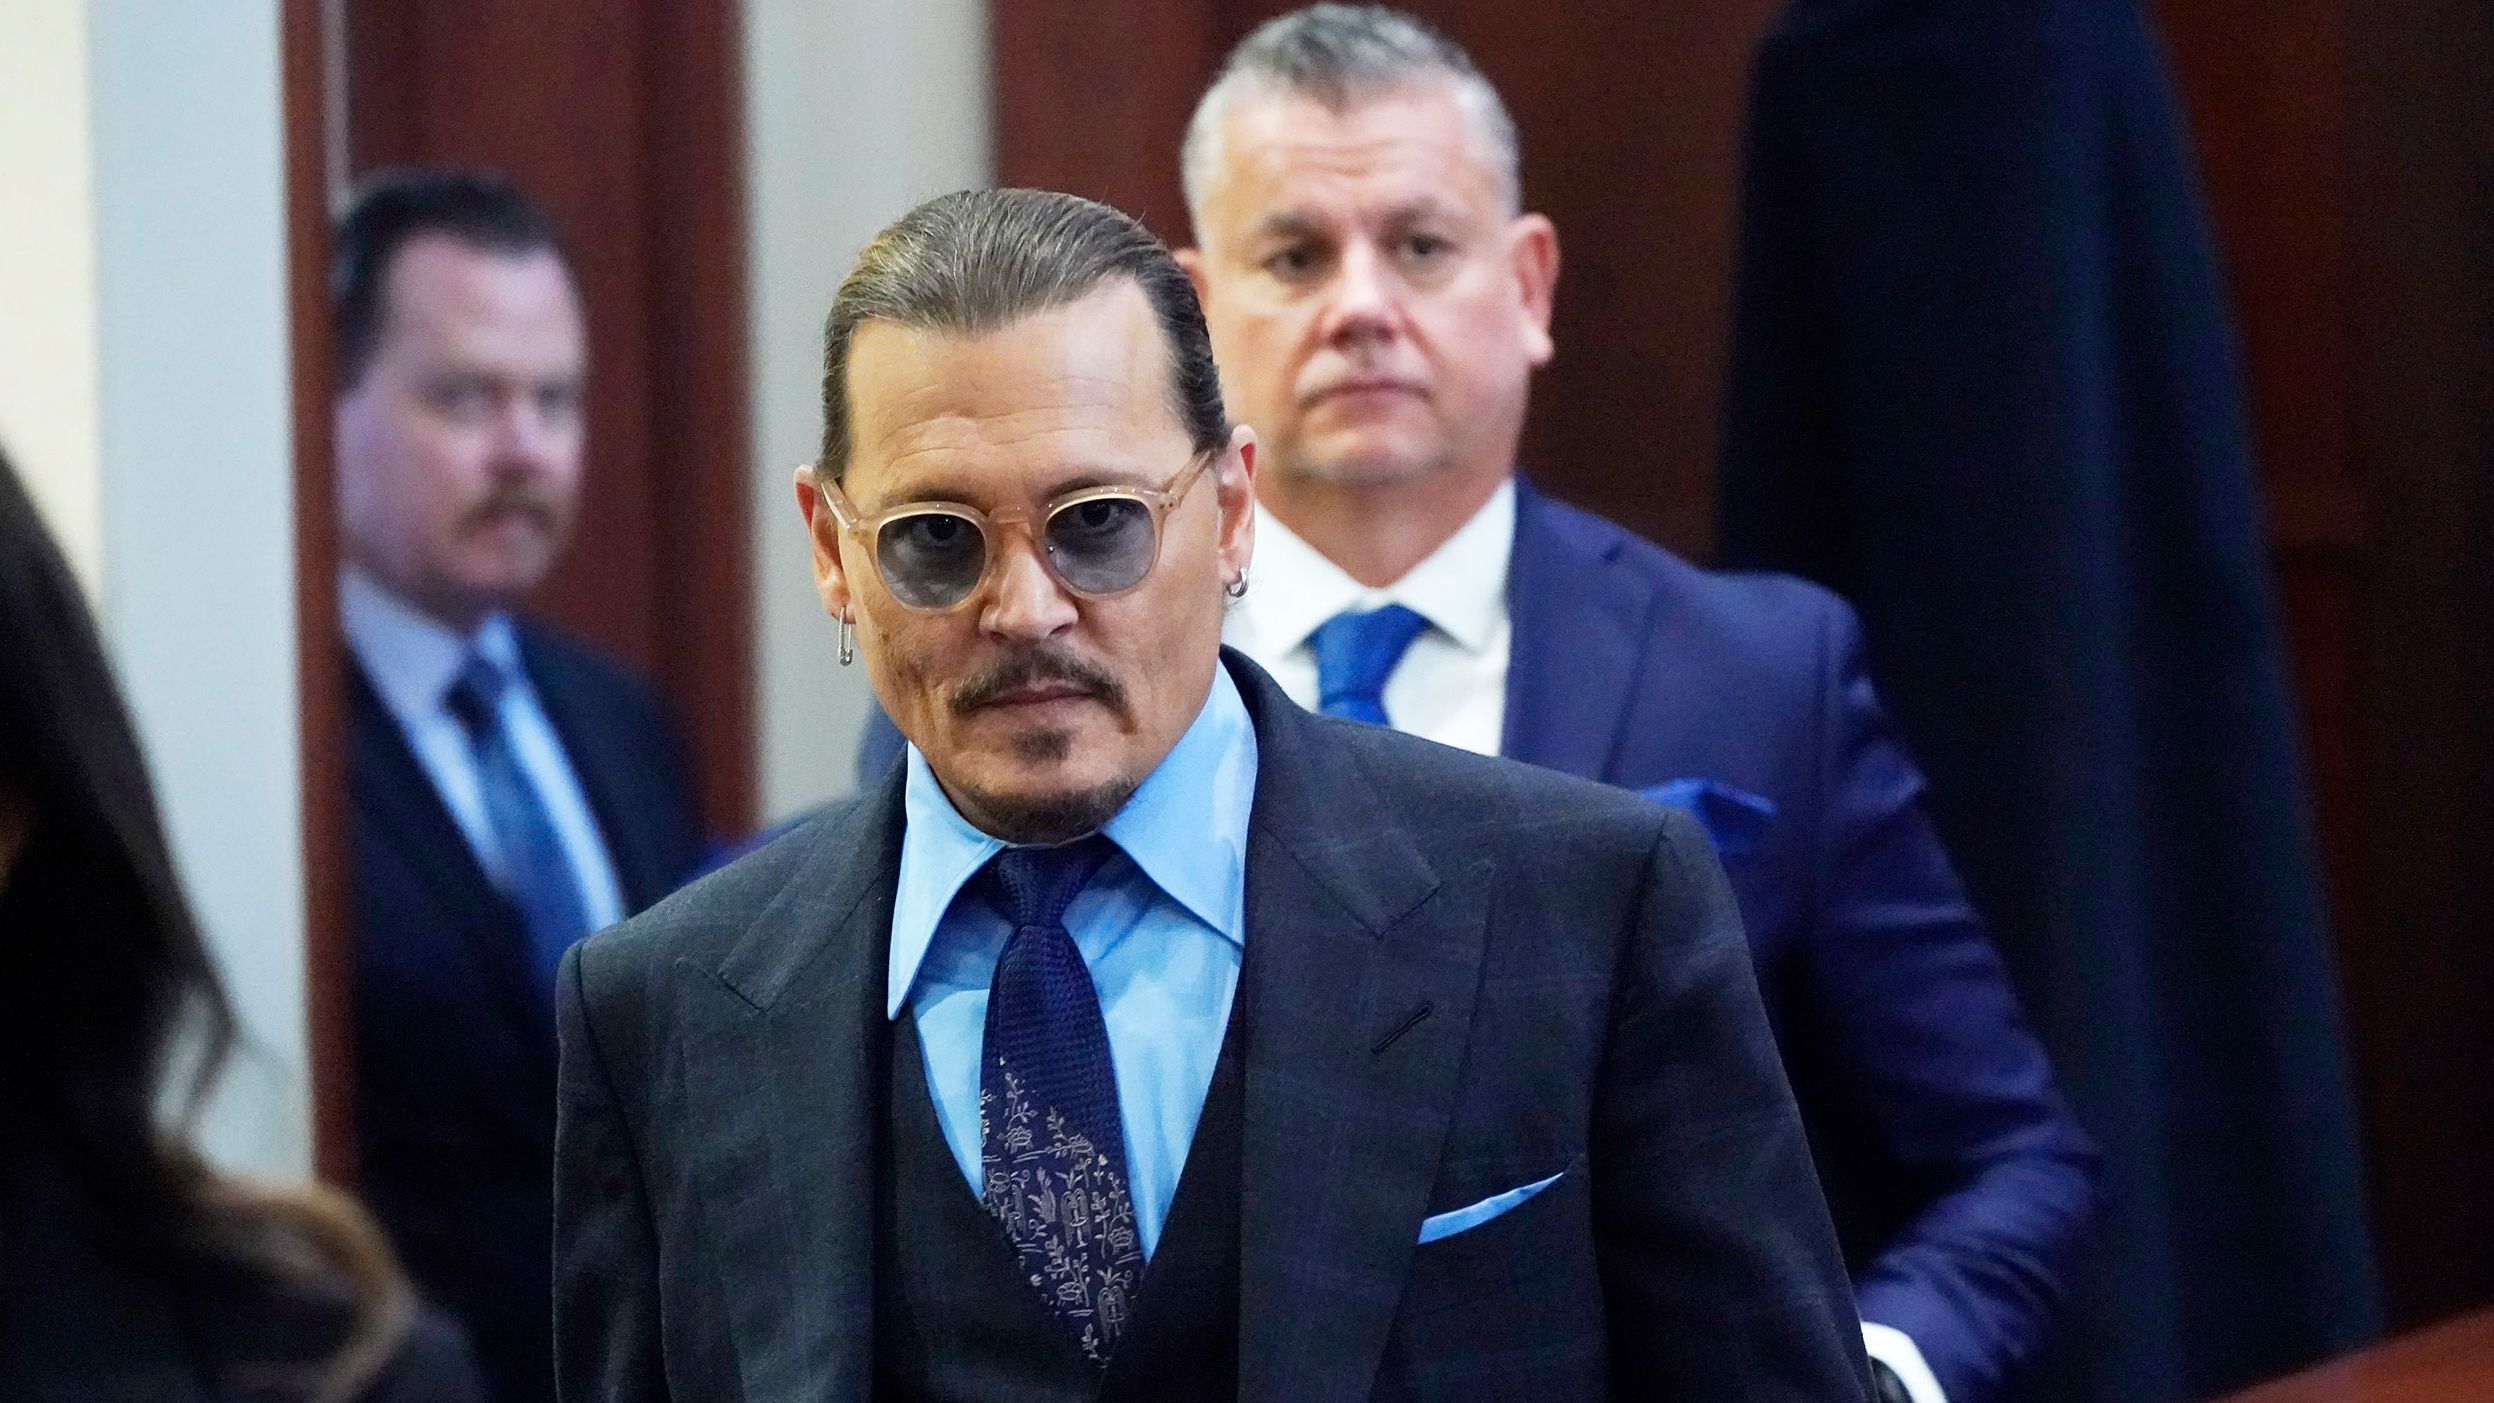 Johnny Depp. arriving at court in Virginia on Monday. 